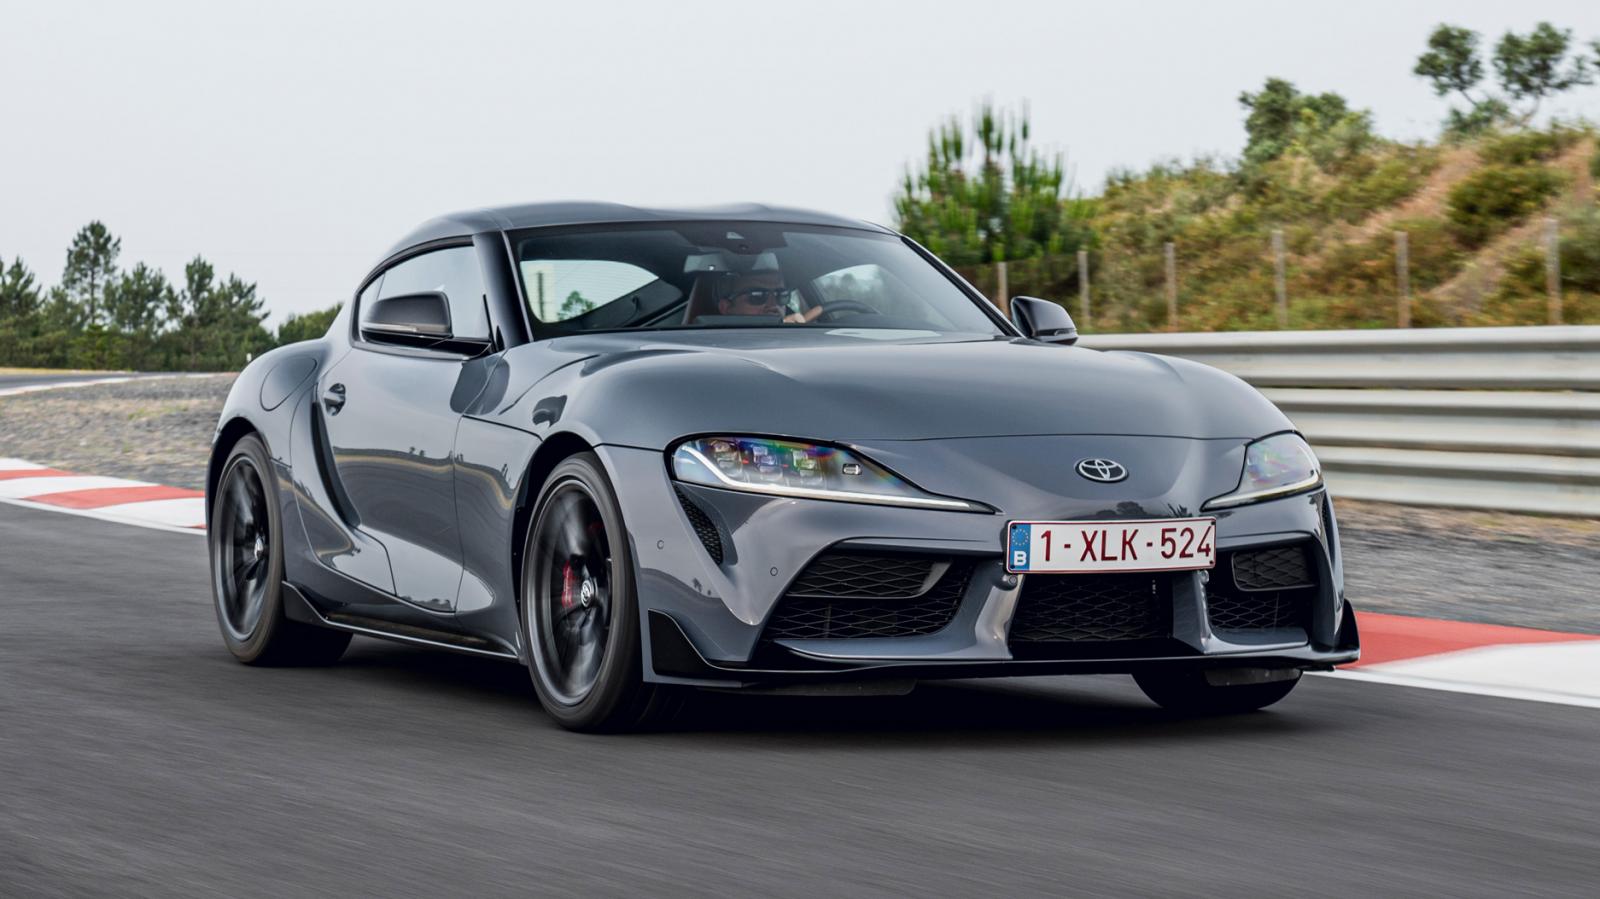 Toyota GR Supra specifications